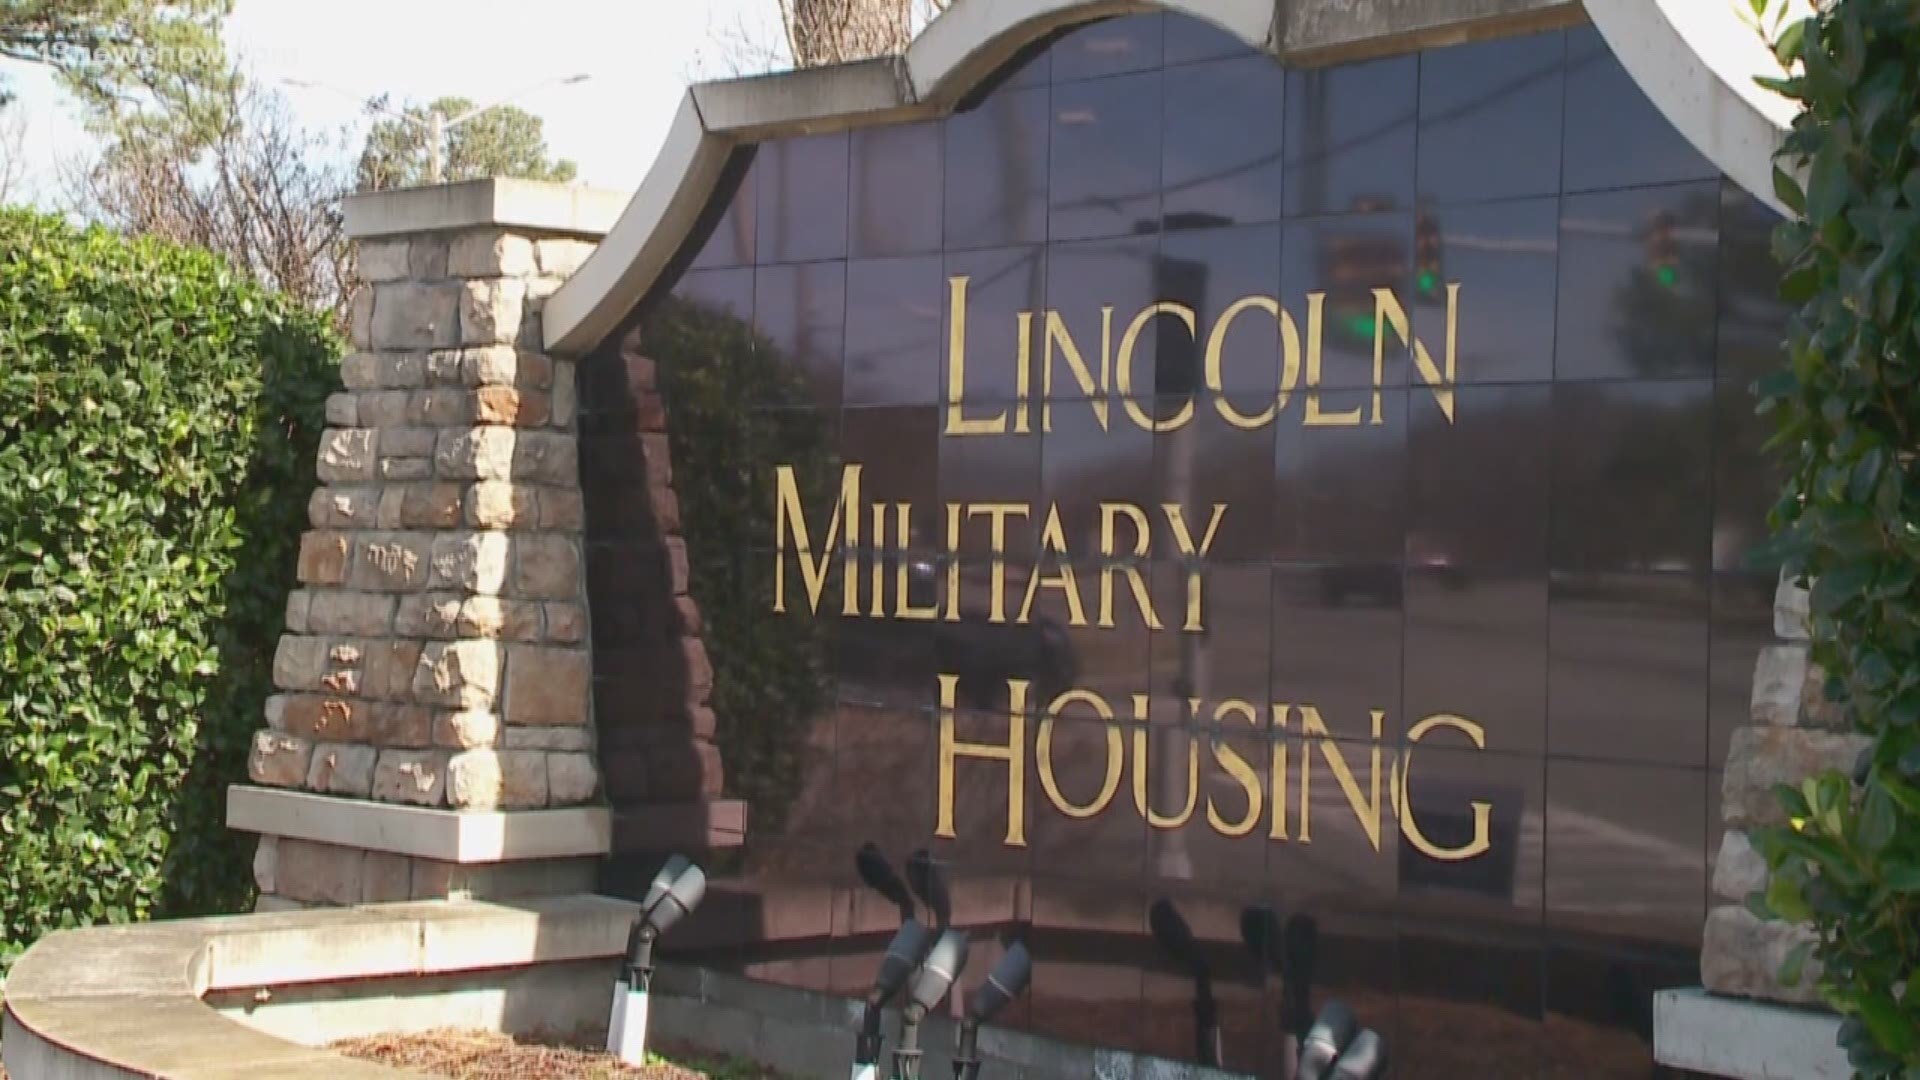 A new report about the Dept. of Defense's oversight of privatized military housing said the military does not have reliable information on problems with those homes.